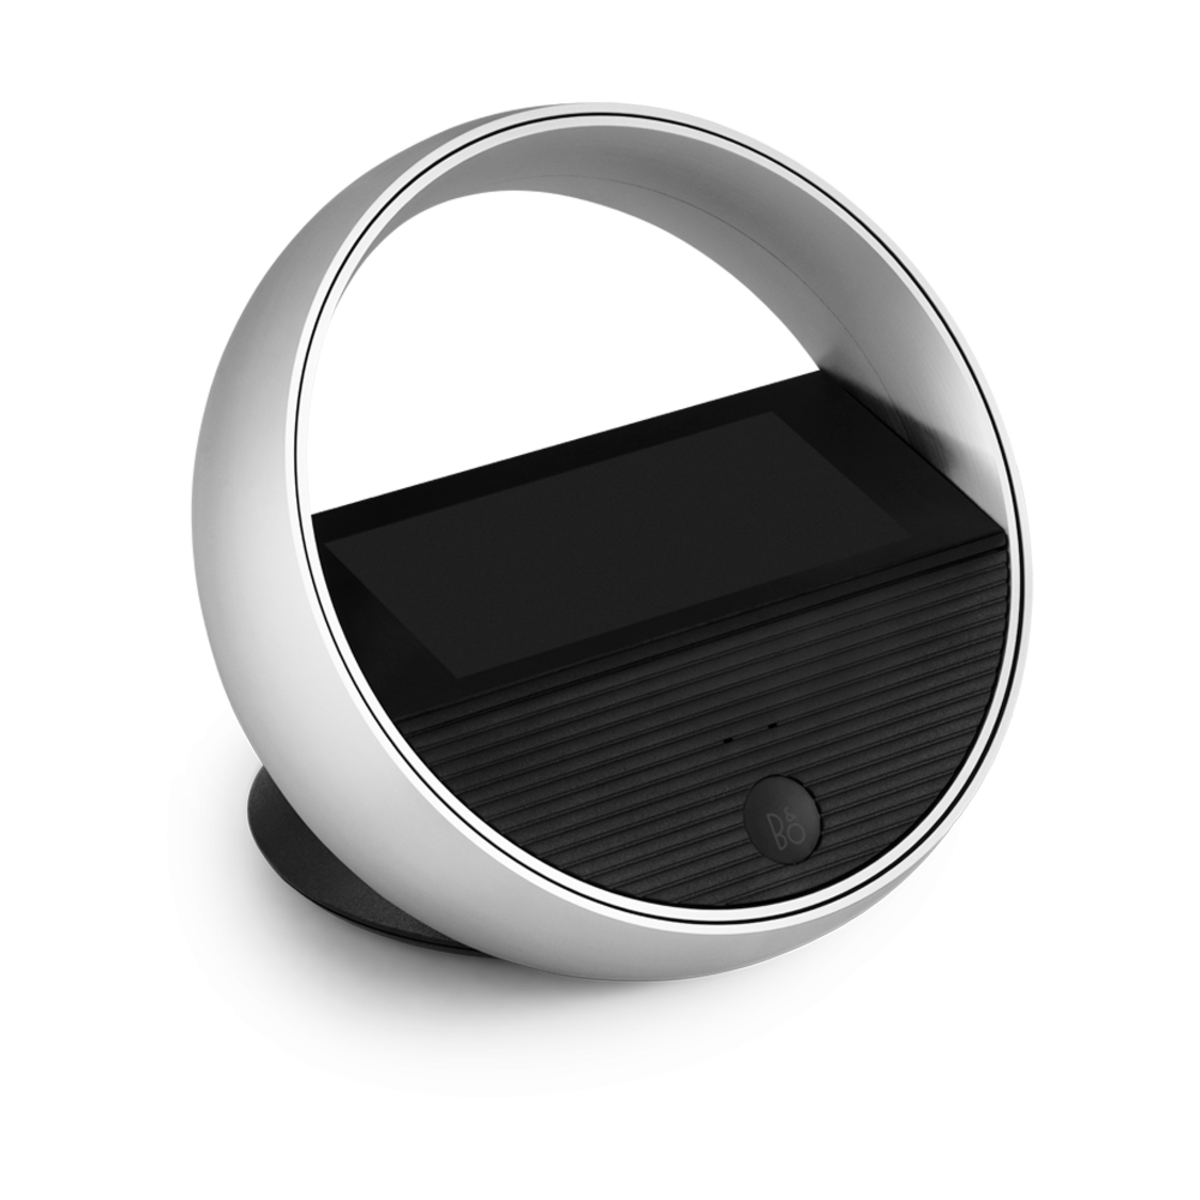 Bang & Olufsen BeoRemote Halo Touch Remote Control